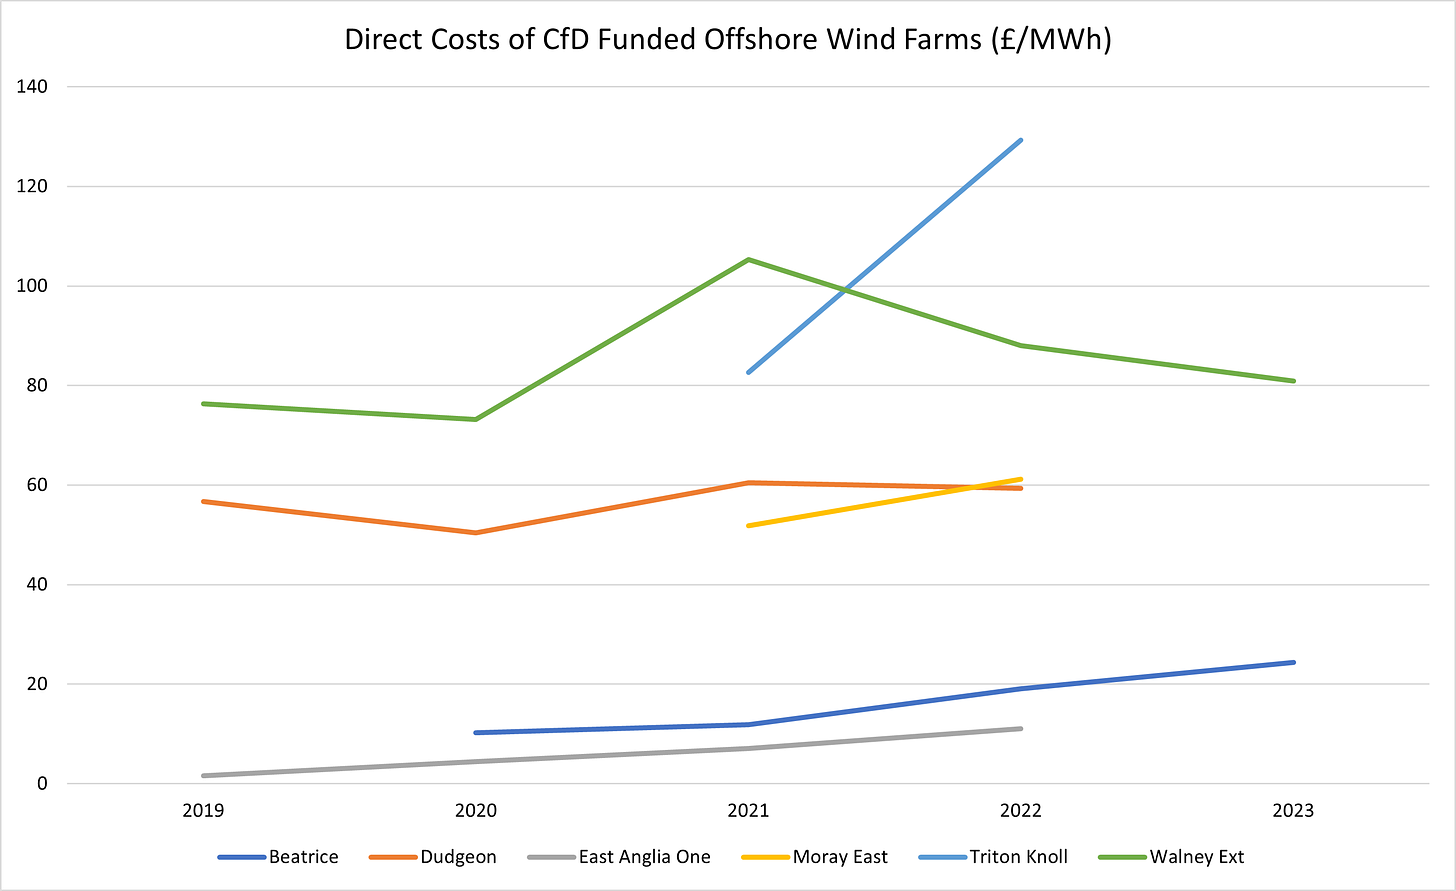 Figure 2 - Direct Costs of CfD Funded Offshore Windfarms (£ per MWh)